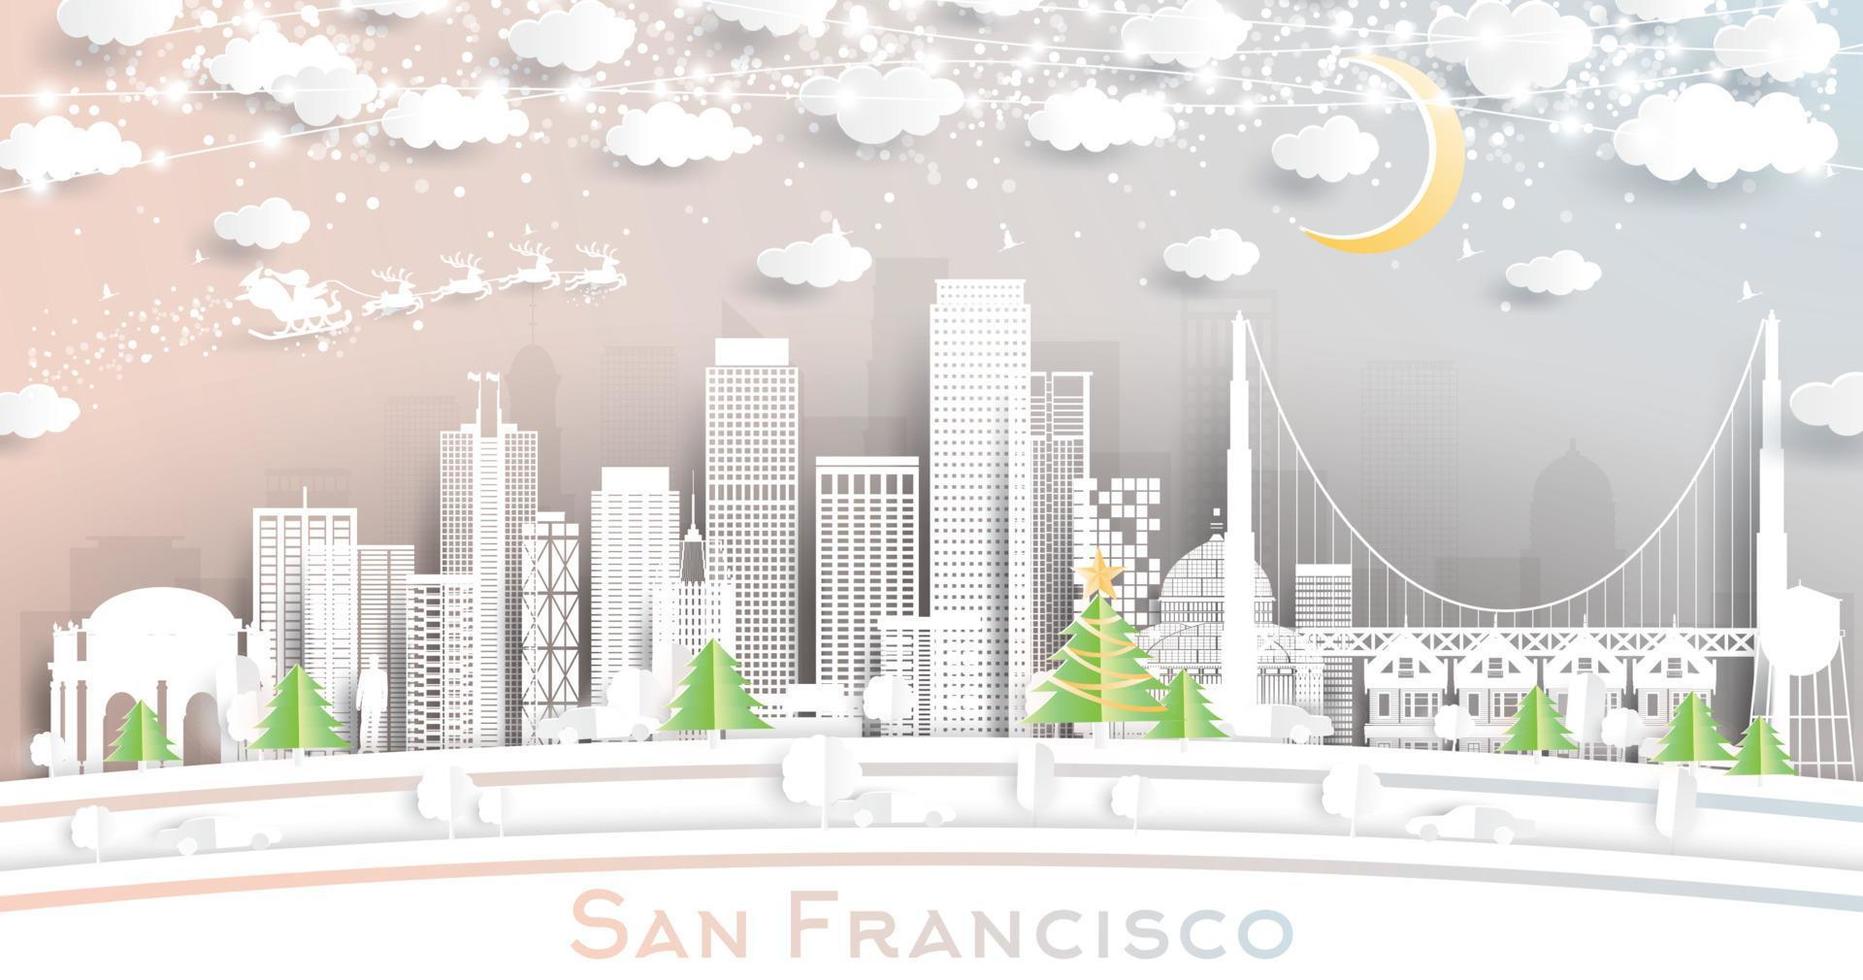 San Francisco California USA City Skyline in Paper Cut Style with Snowflakes, Moon and Neon Garland. vector